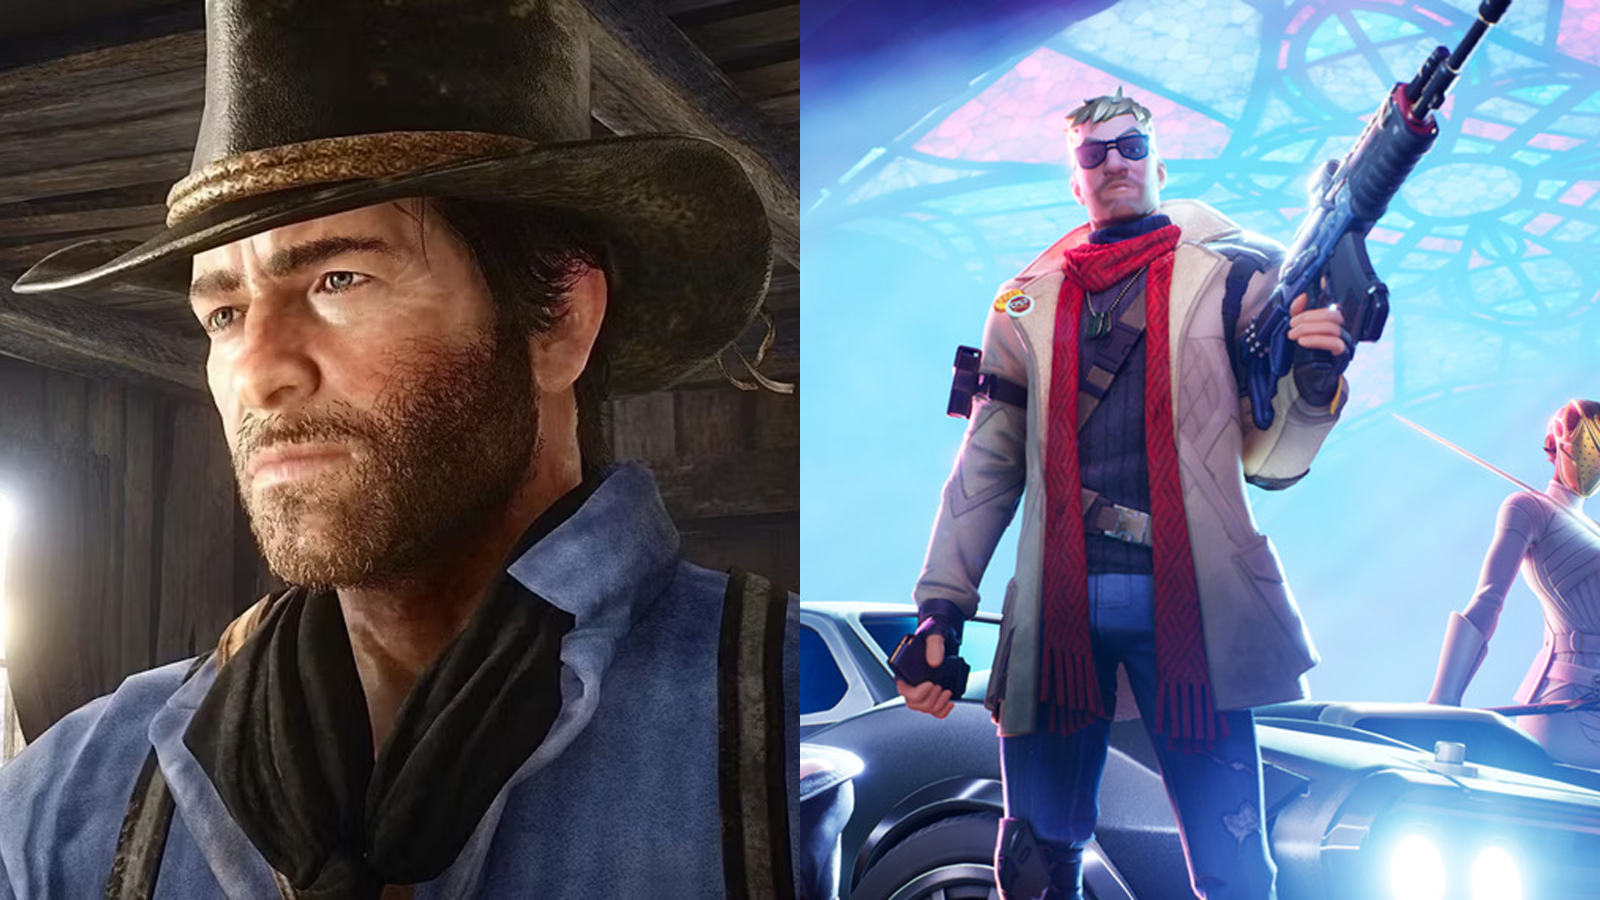 Fortnite players want excellent Arthur Morgan RDR2 skin to be